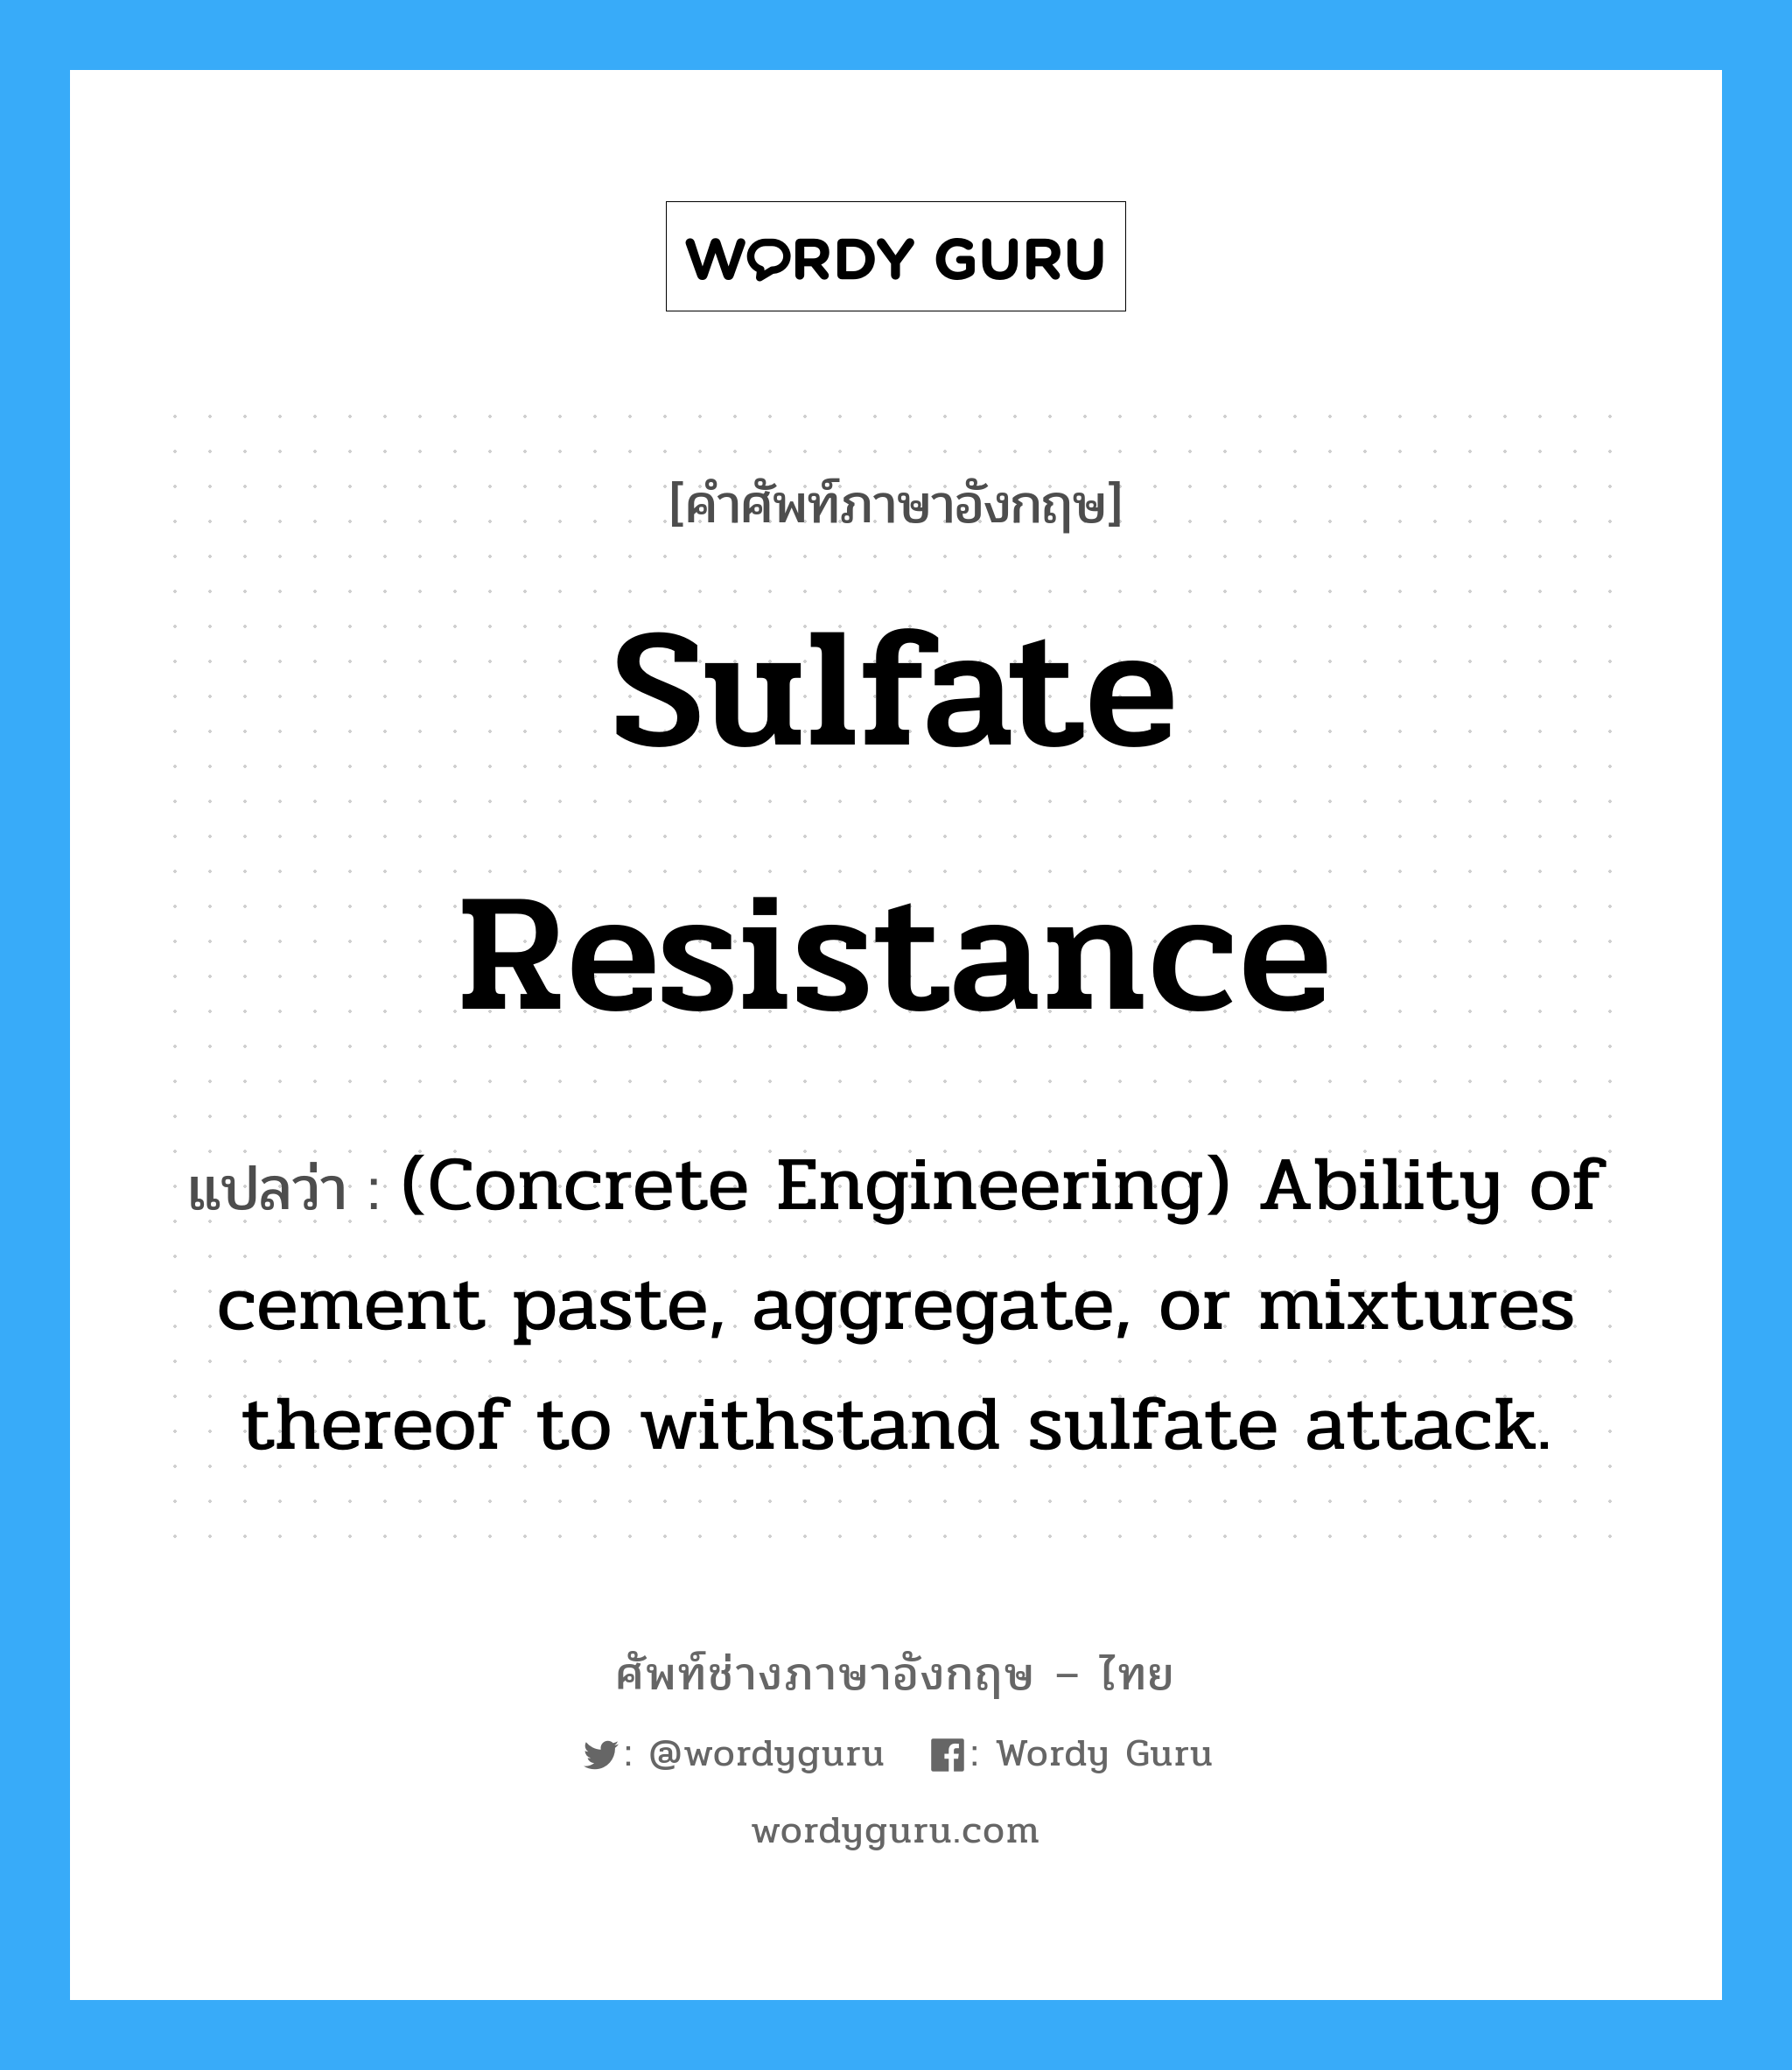 Sulfate Resistance แปลว่า?, คำศัพท์ช่างภาษาอังกฤษ - ไทย Sulfate Resistance คำศัพท์ภาษาอังกฤษ Sulfate Resistance แปลว่า (Concrete Engineering) Ability of cement paste, aggregate, or mixtures thereof to withstand sulfate attack.